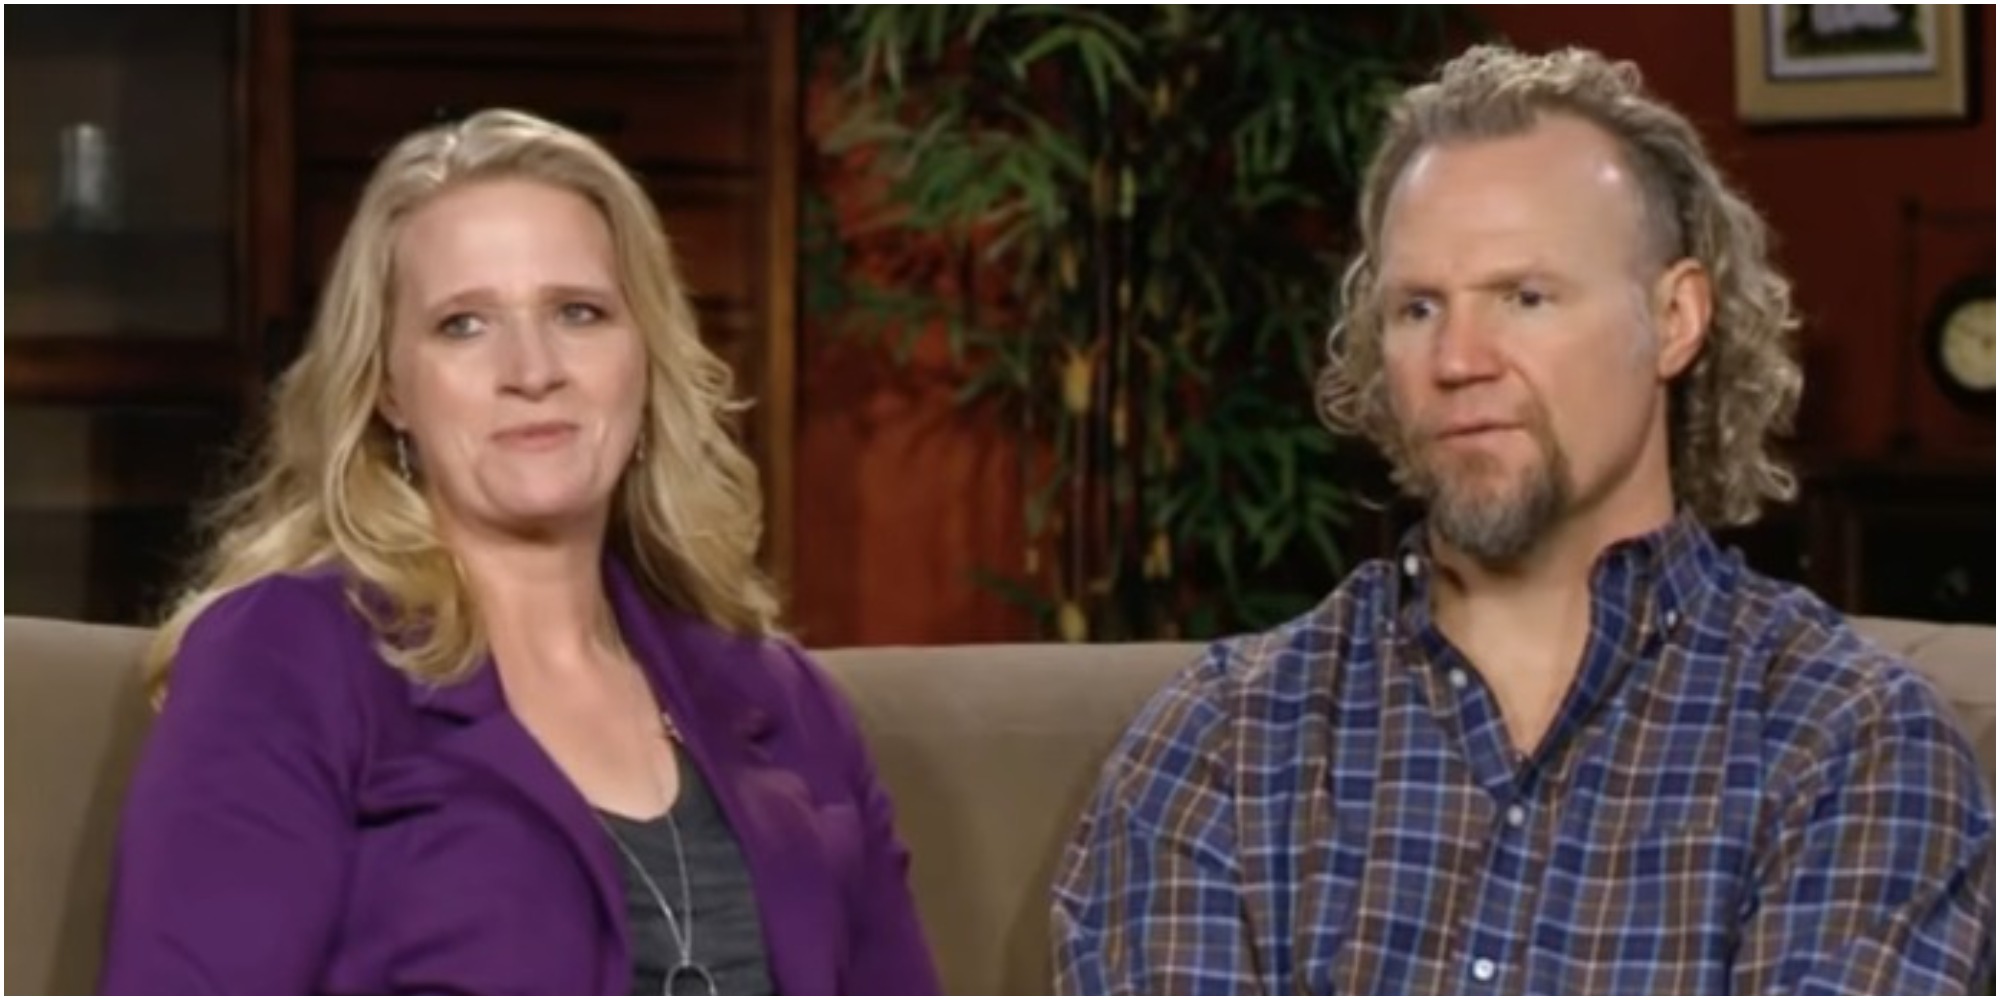 Christine and Kody Brown sit down for a "Sister Wives" confessional.